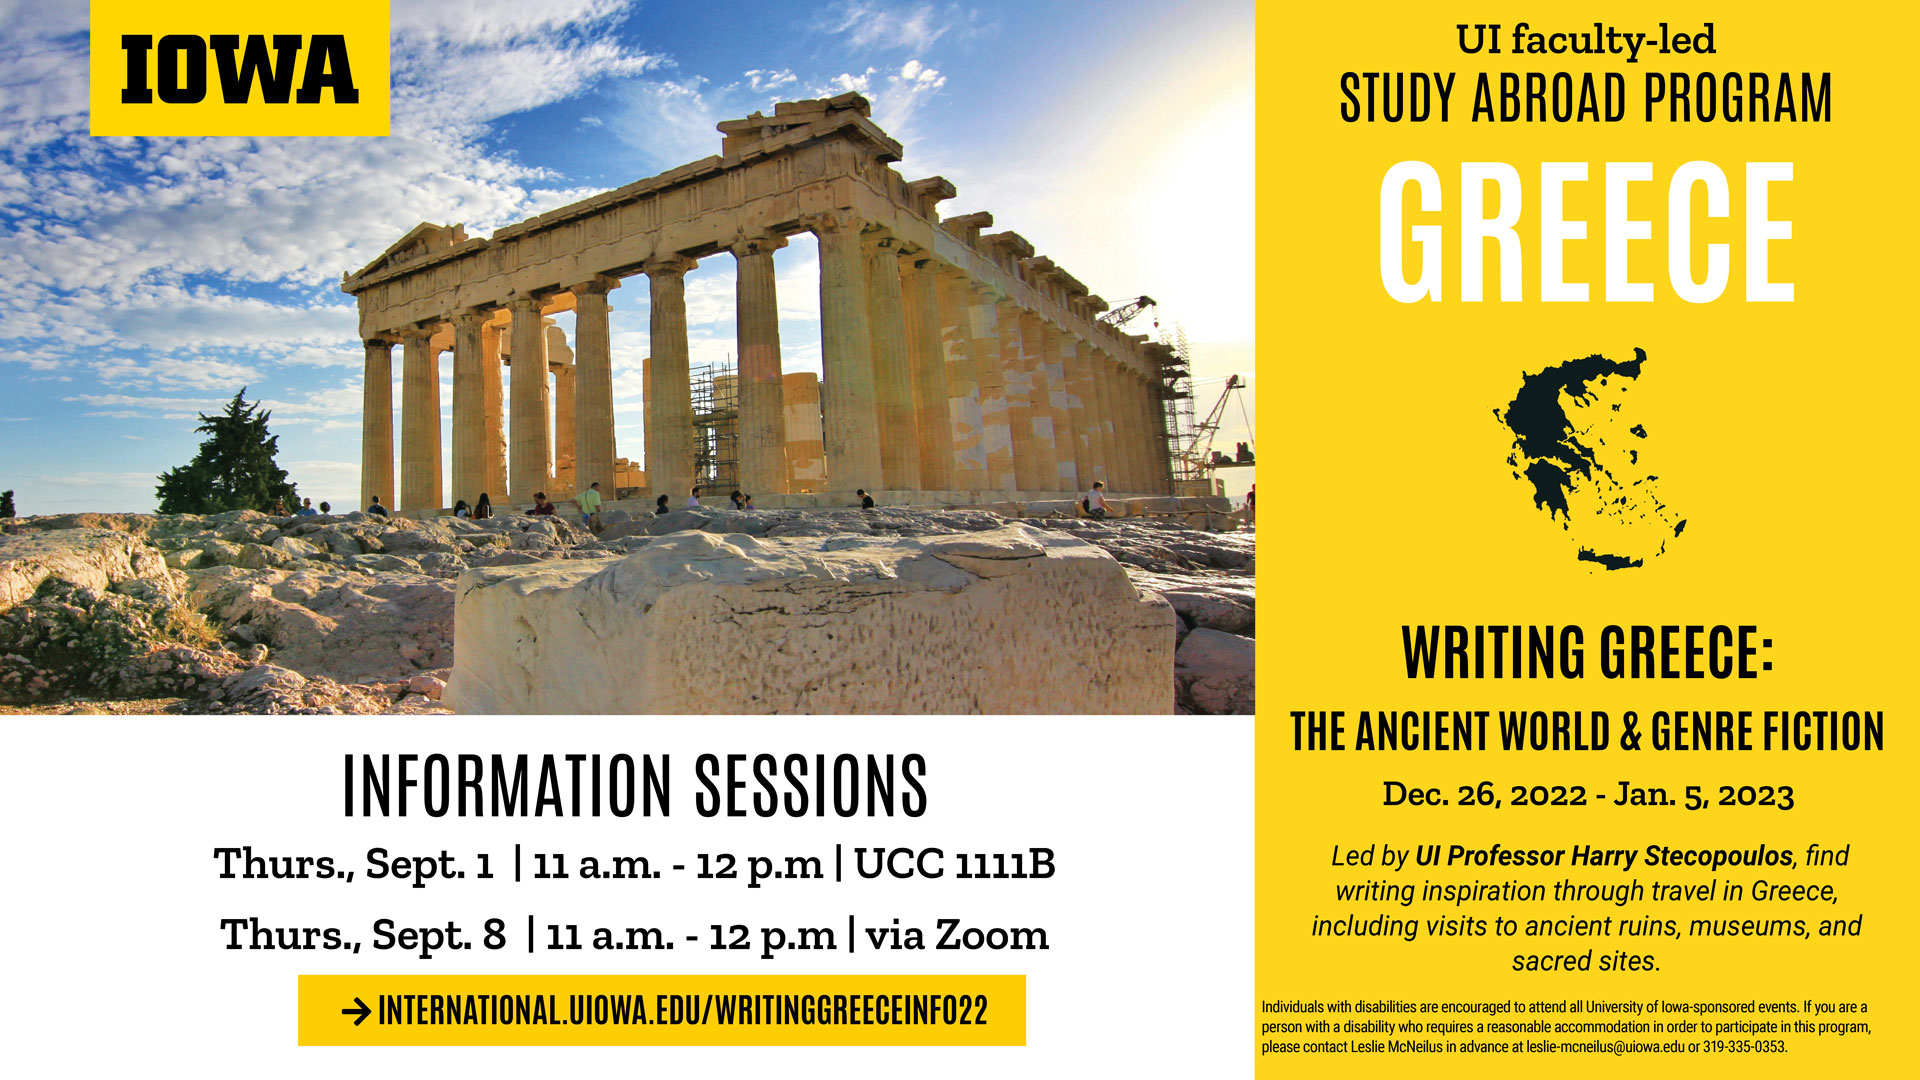 International Programs – Study abroad in Greece Info sessions. Visit international programs website for more info